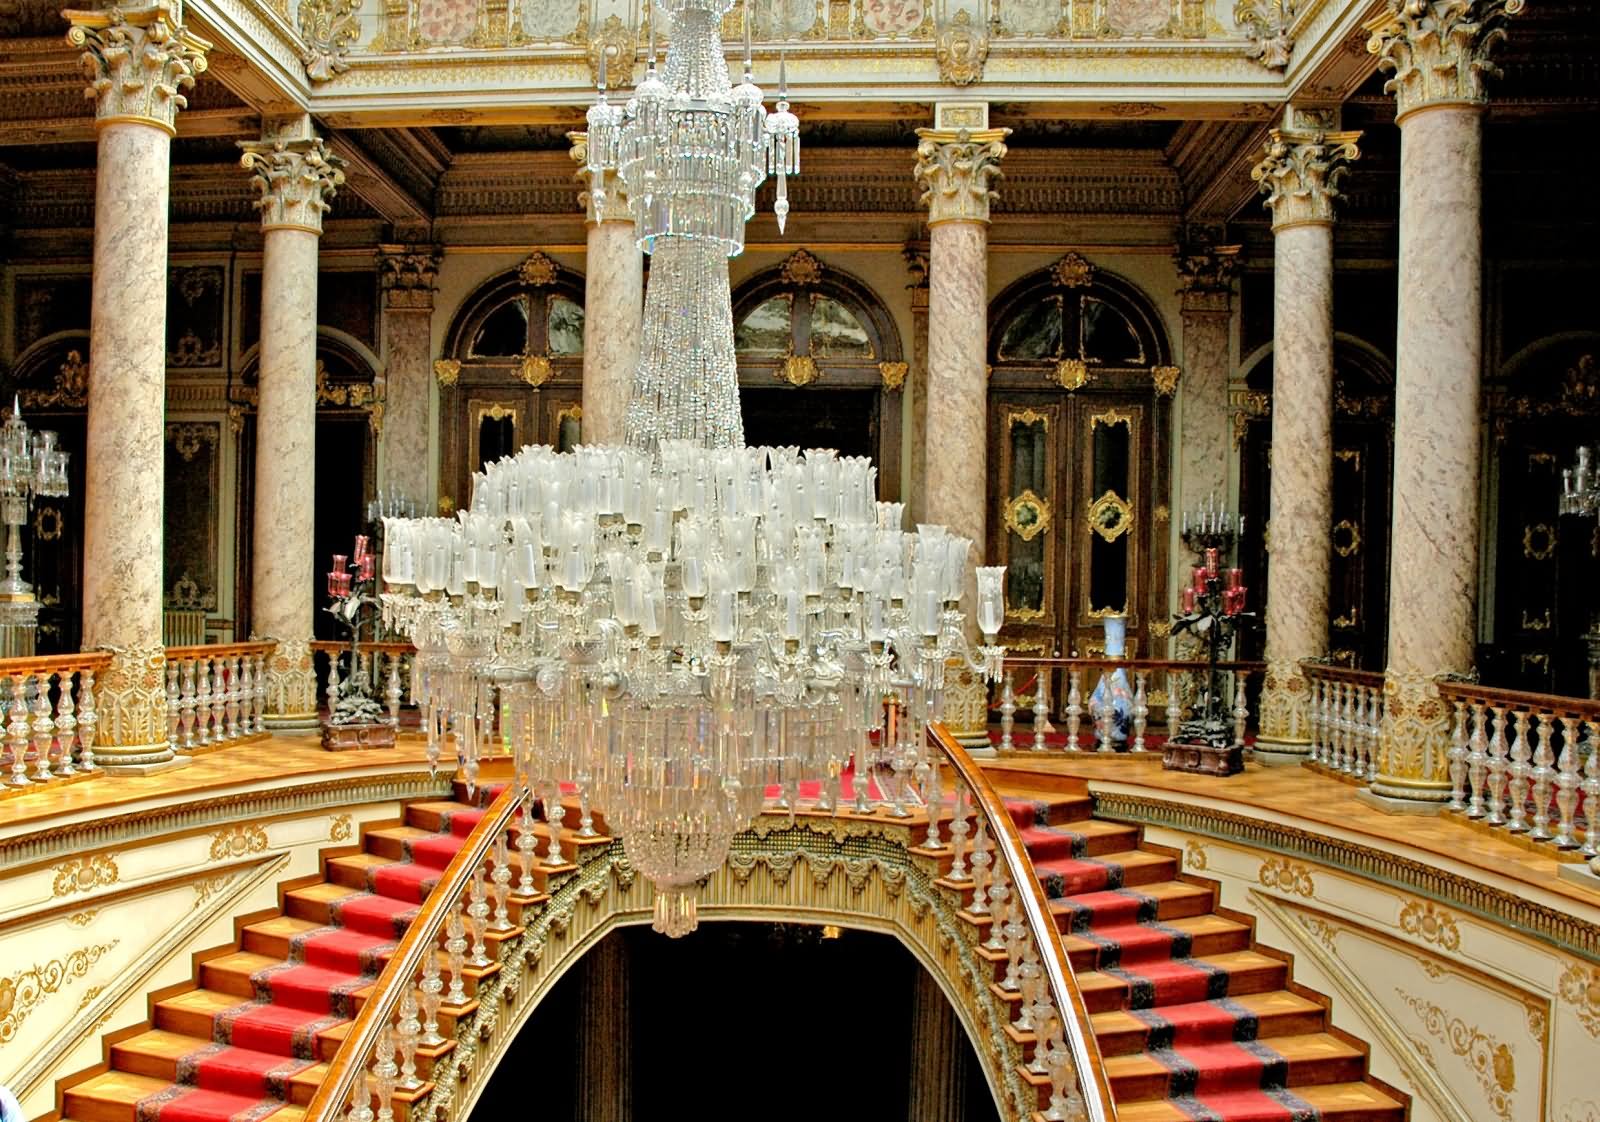 Stairs Inside The Dolmabahce Palace, Istanbul